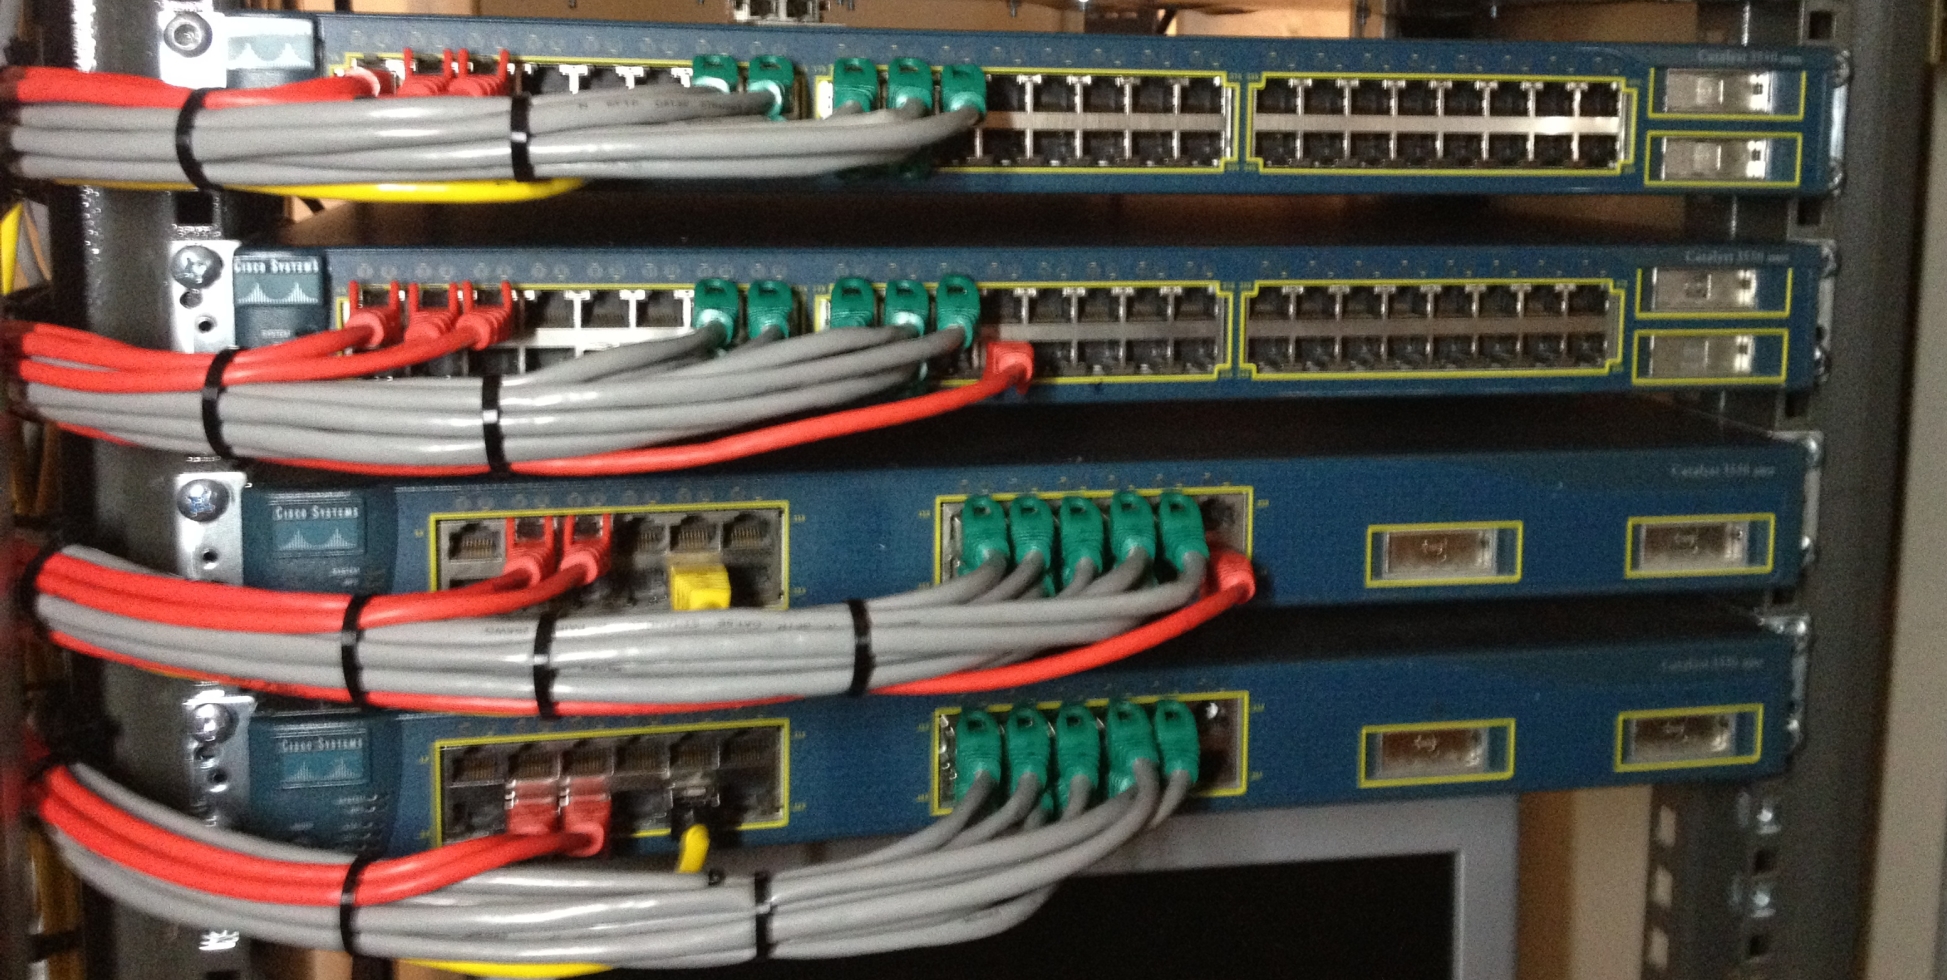 Cisco 3560 switch RJ45 connections